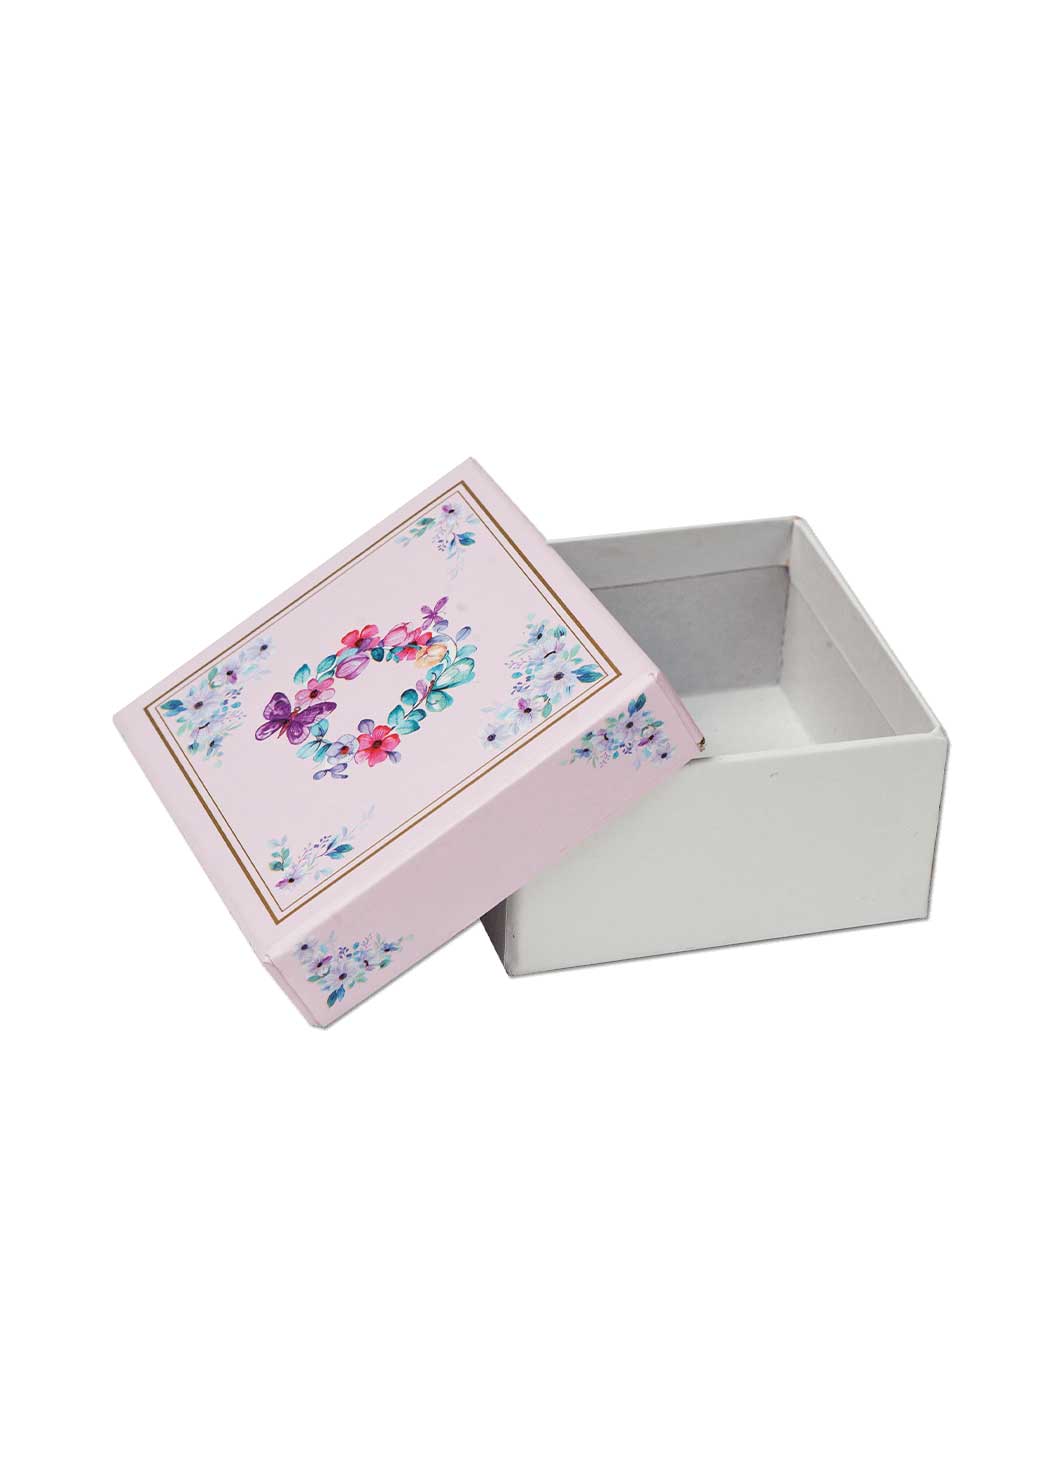 Water Colour Texture Floral Design Box for Packing